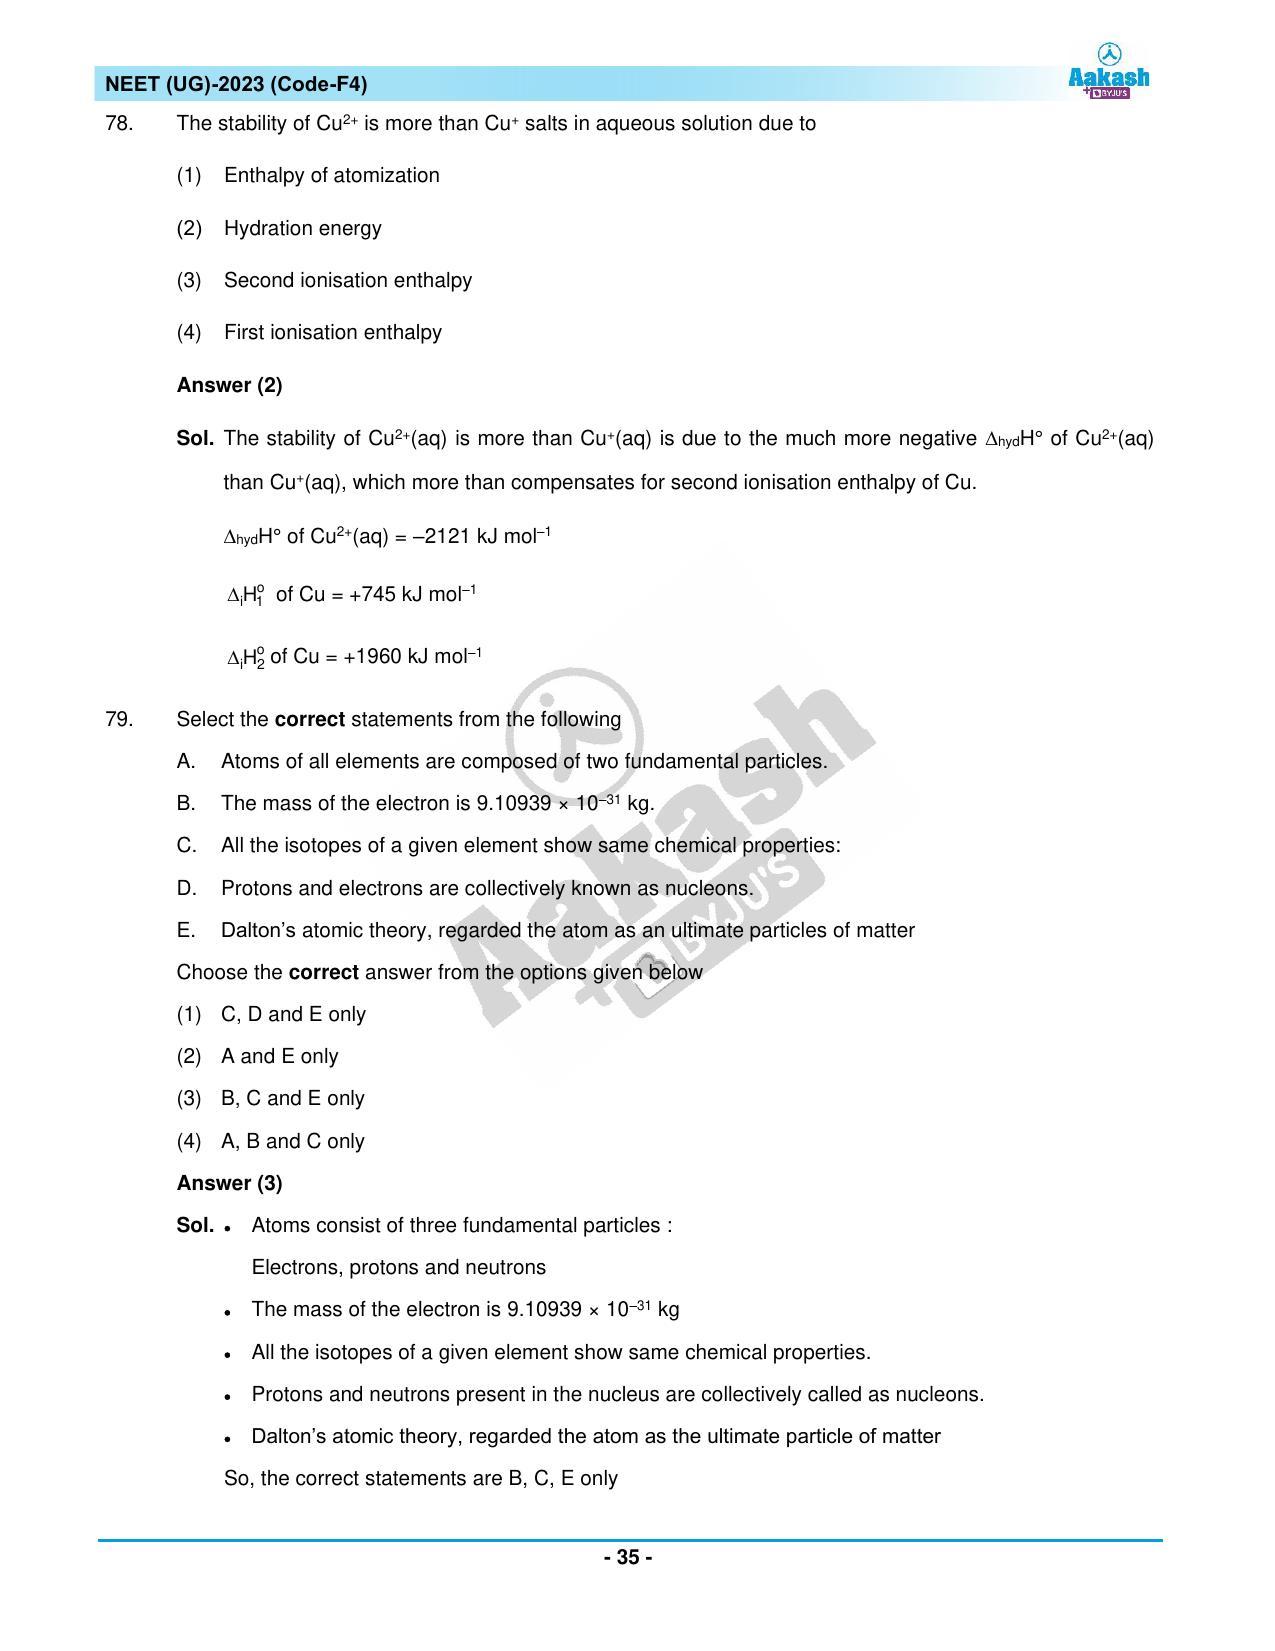 NEET 2023 Question Paper F4 - Page 35